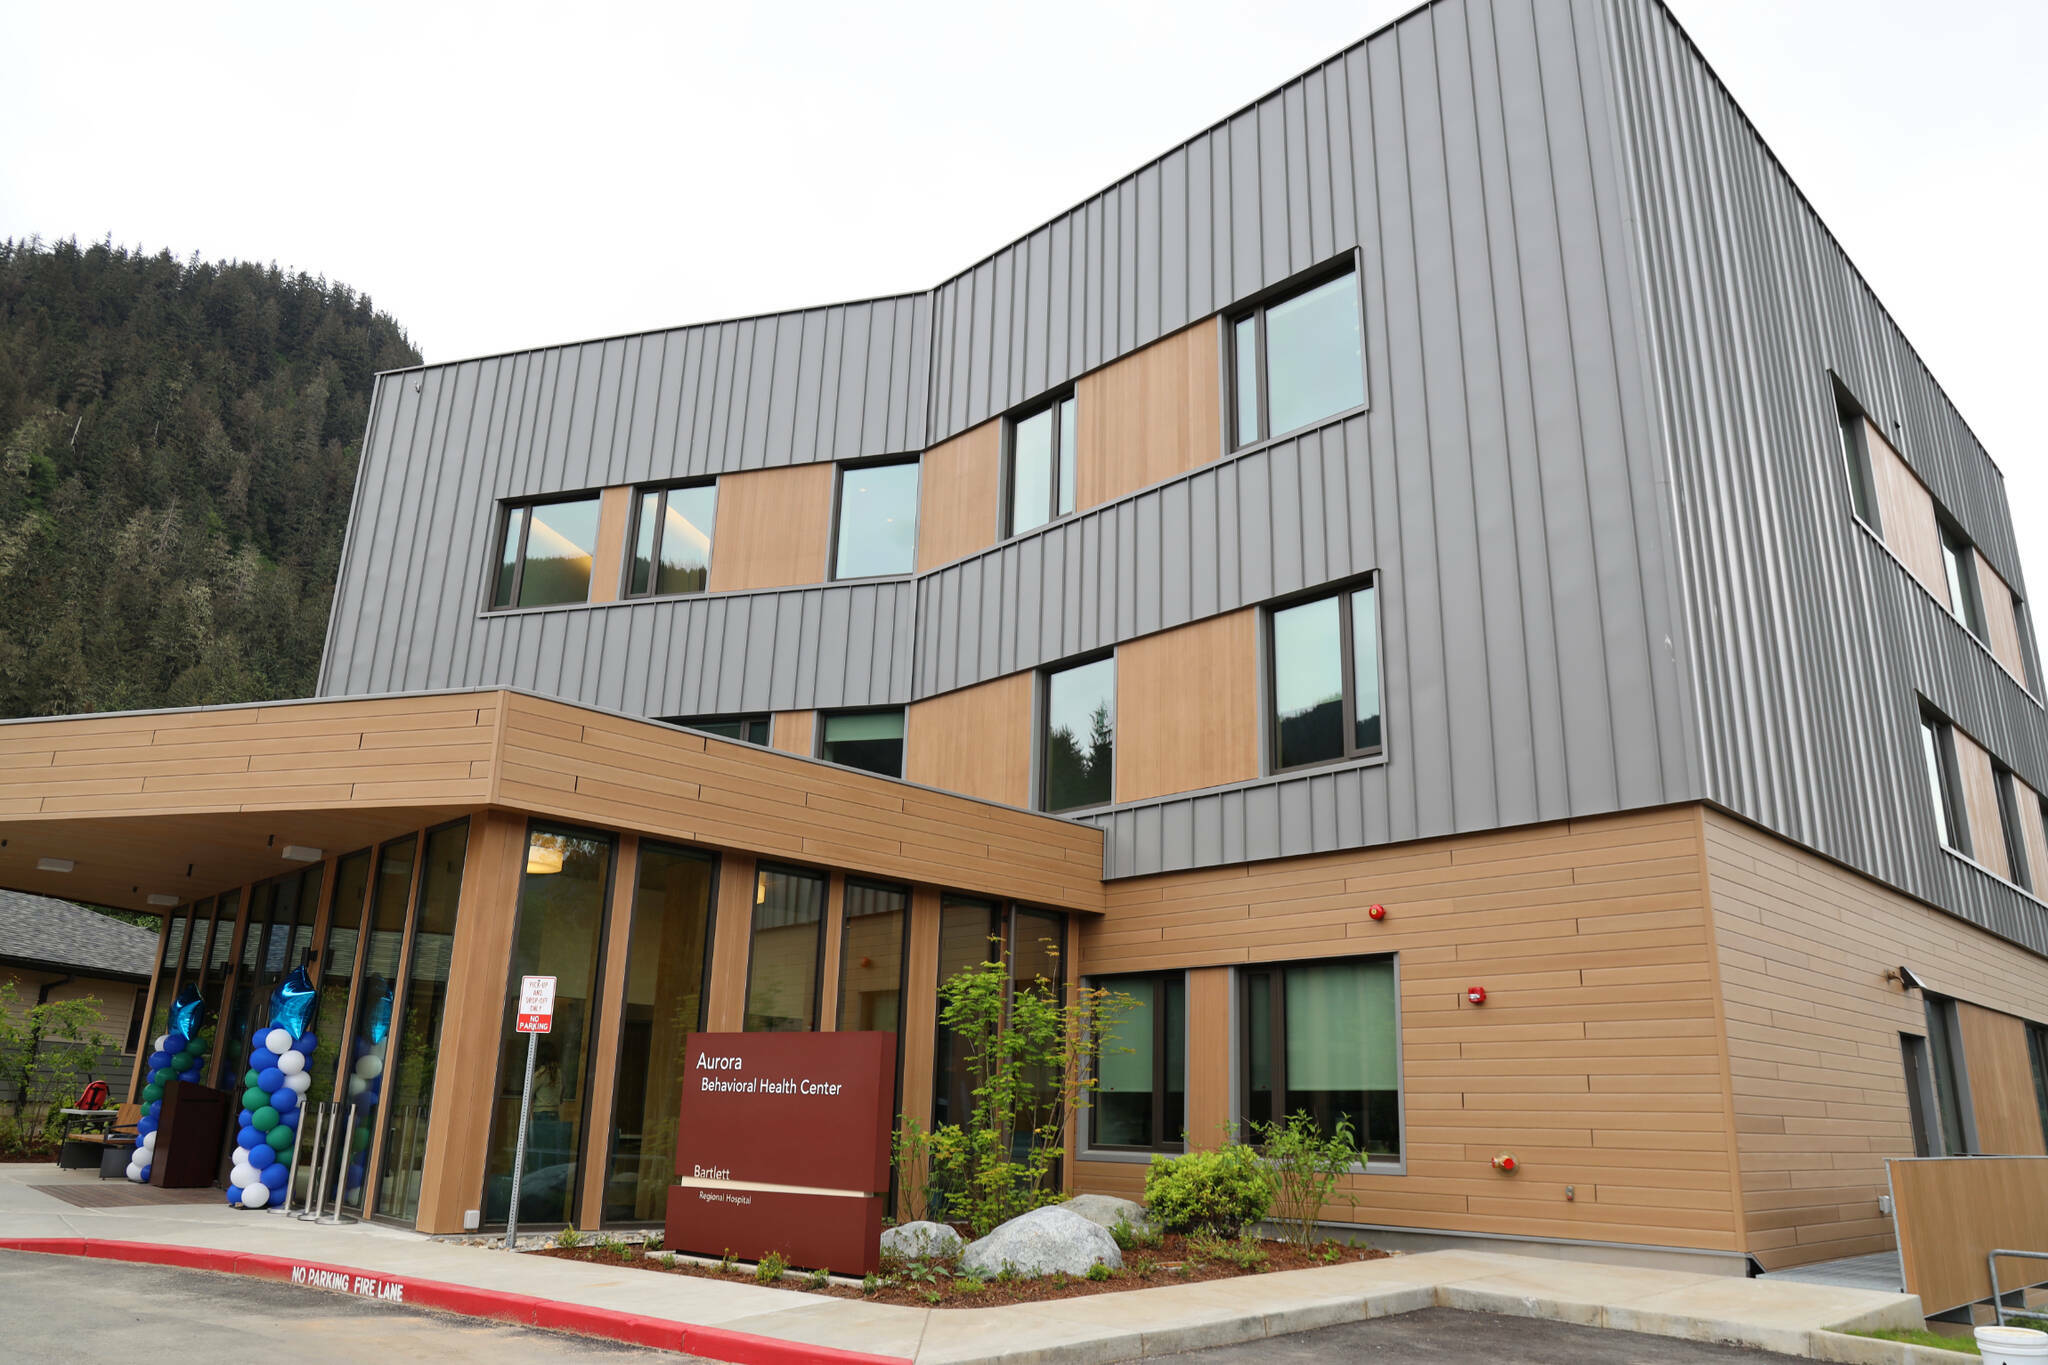 Bartlett Regional Hospital’s behavioral health and crisis stabilization center, seen here during its unveiling ceremony on June 14, 2023, is among the areas where program cuts are being considered due to financial difficulties. (Clarise Larson / Juneau Empire file photo)